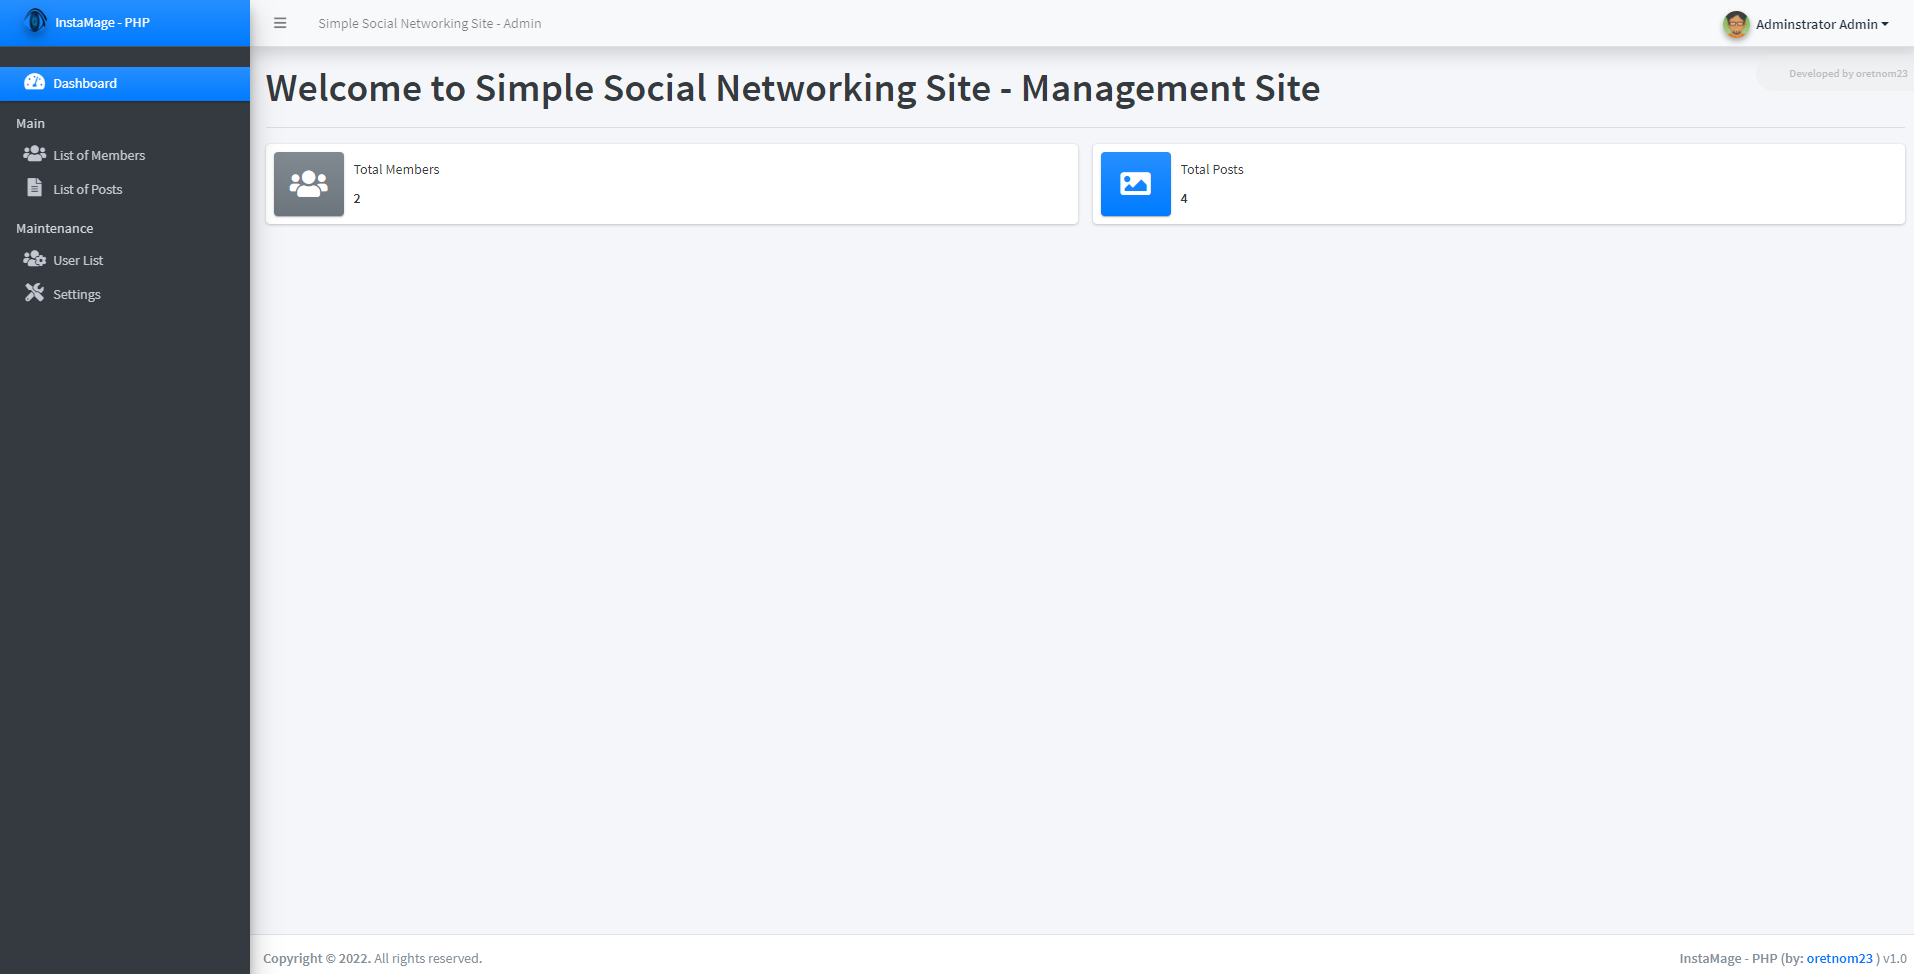 Social Networking Site